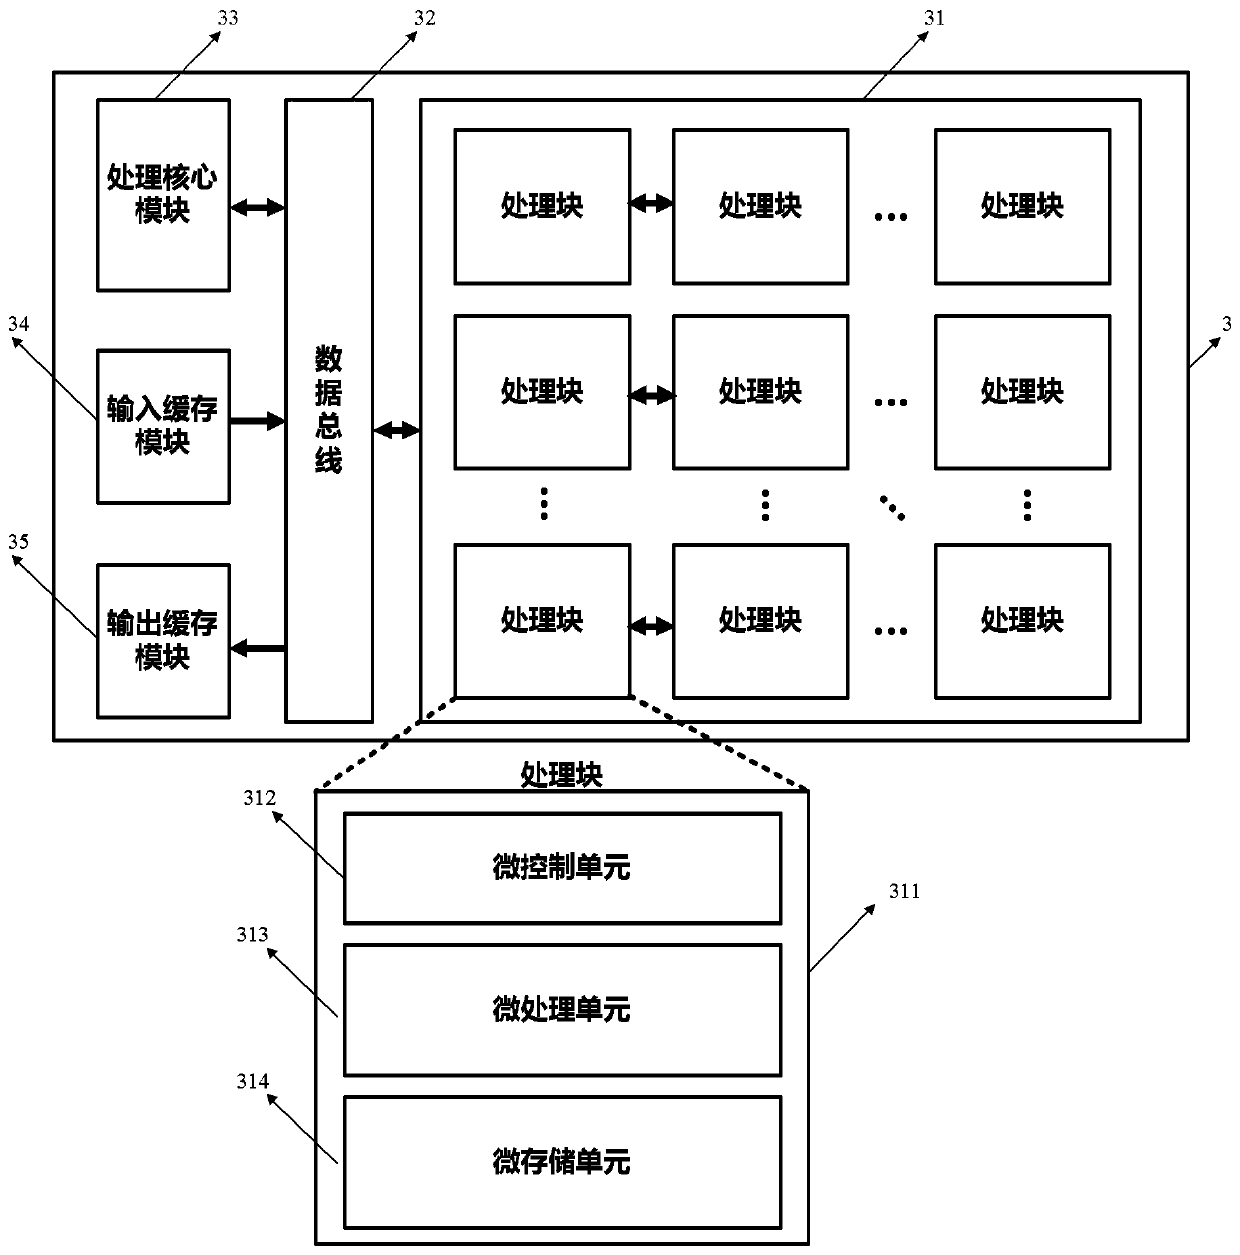 A large-scale image data processing system and method